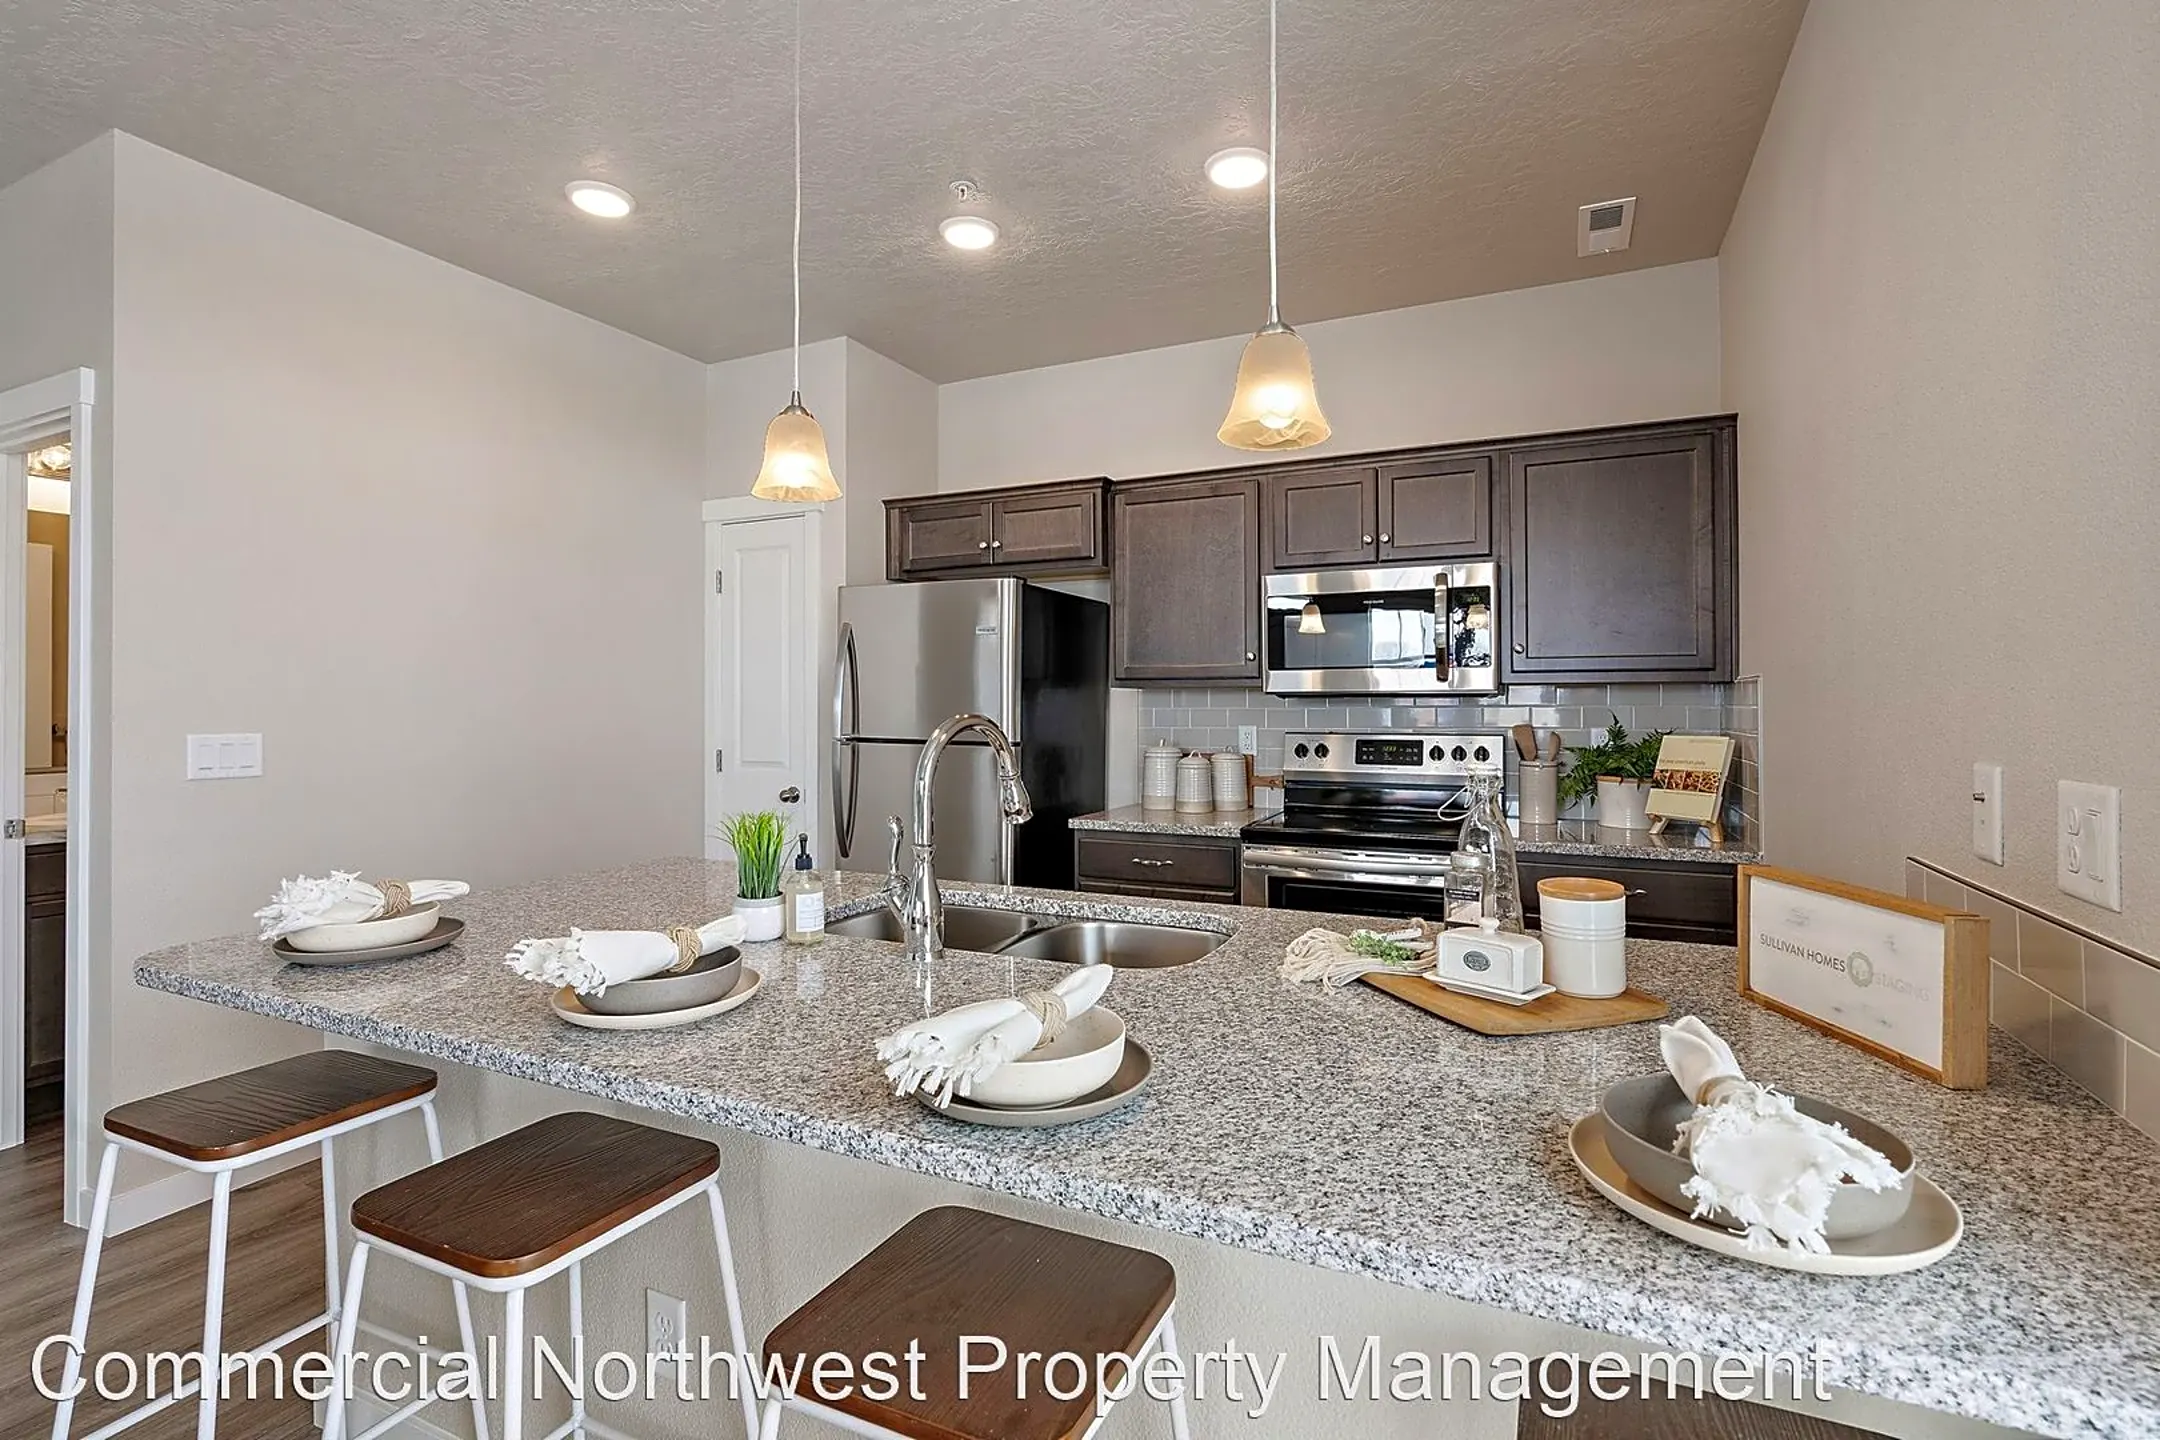 Kitchen - Sunnyvale Village ! 1 Month Free for All Move-ins before 3/15! - Nampa, ID